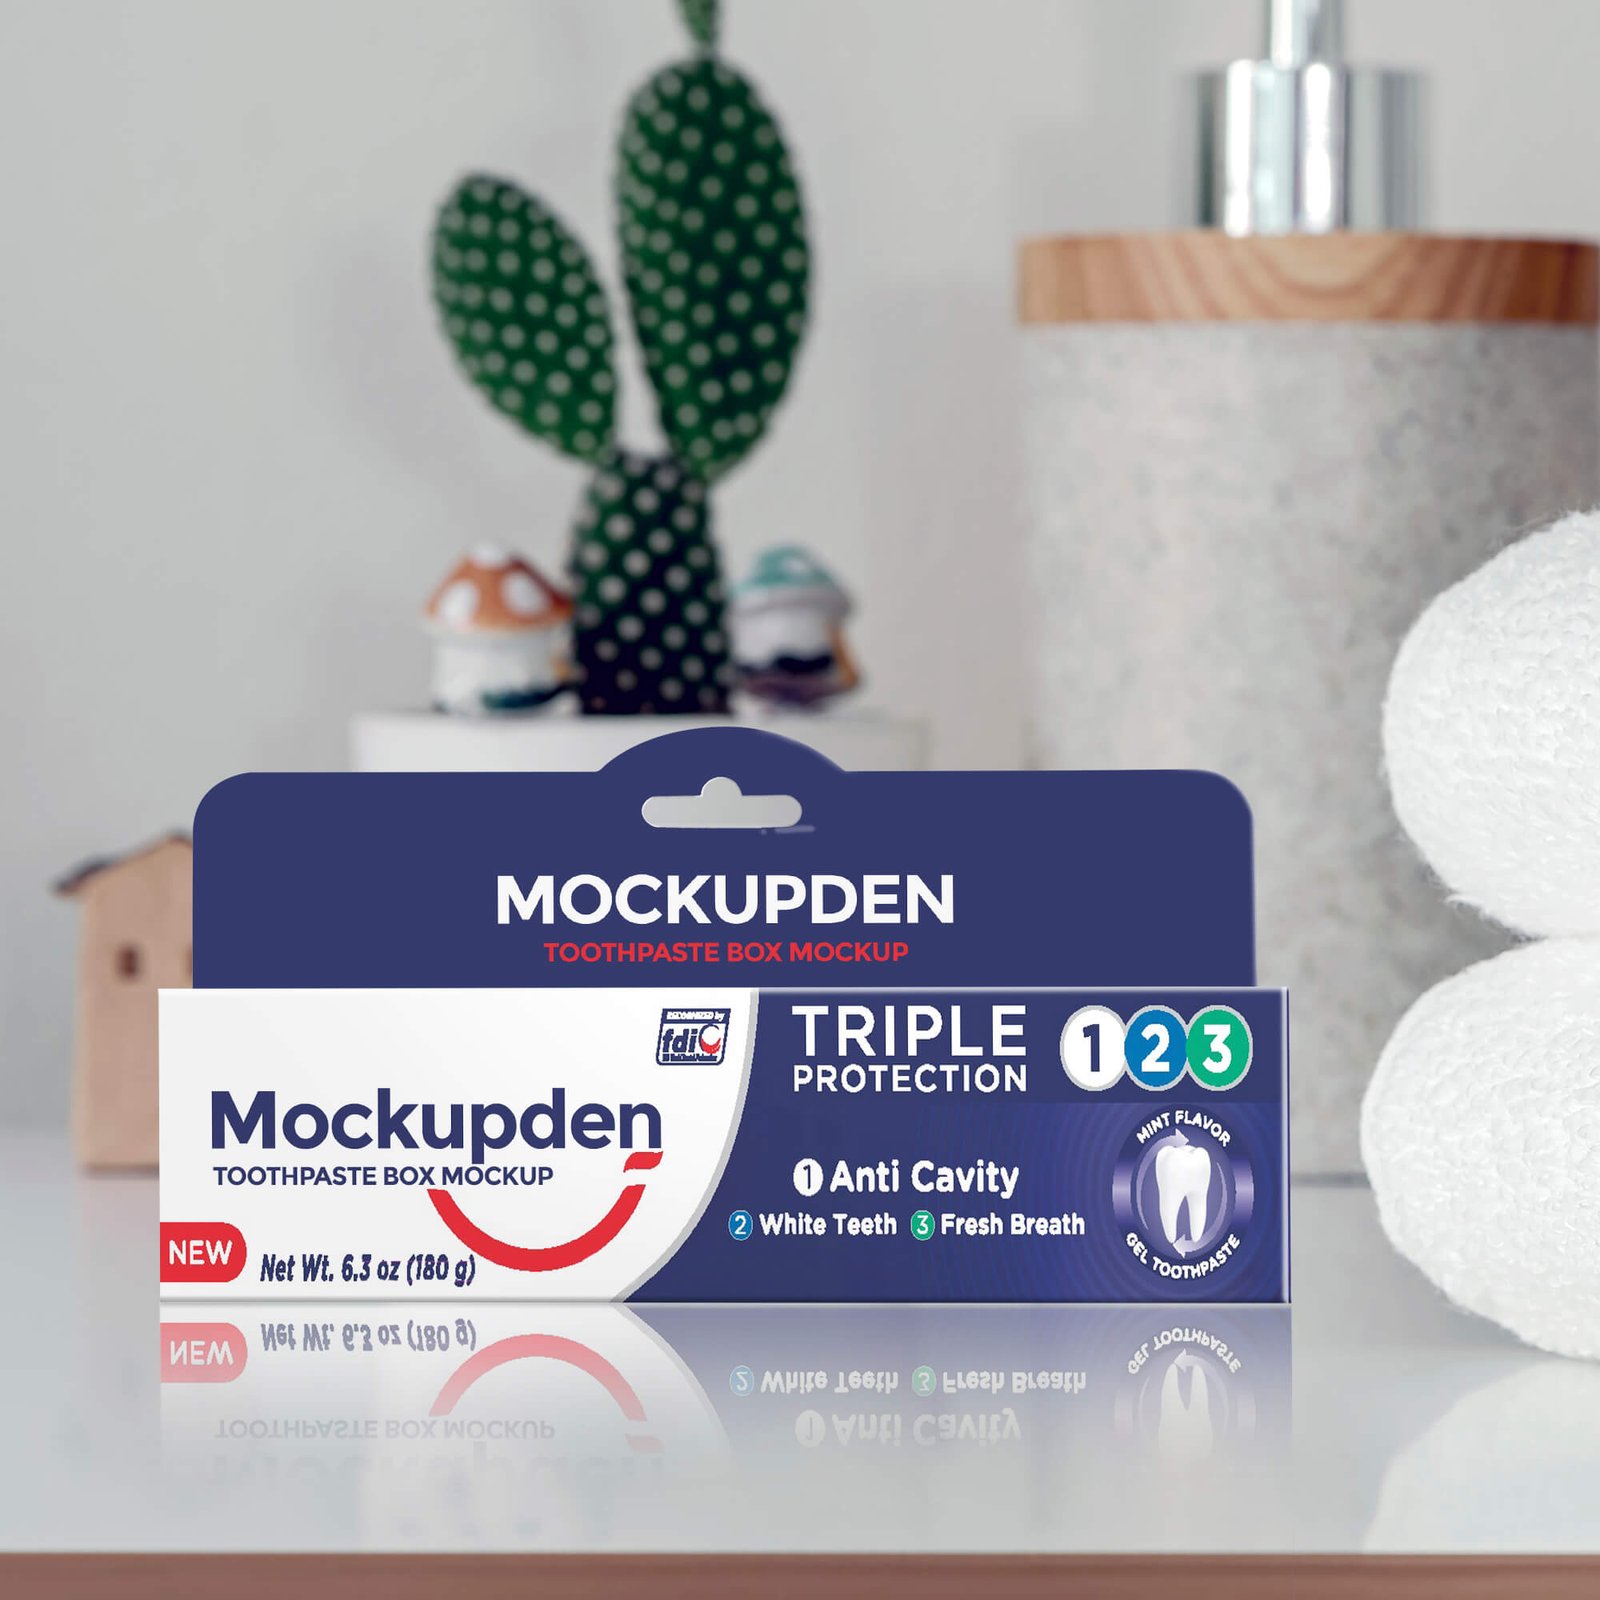 Free Toothpaste Box Mockup PSD Template